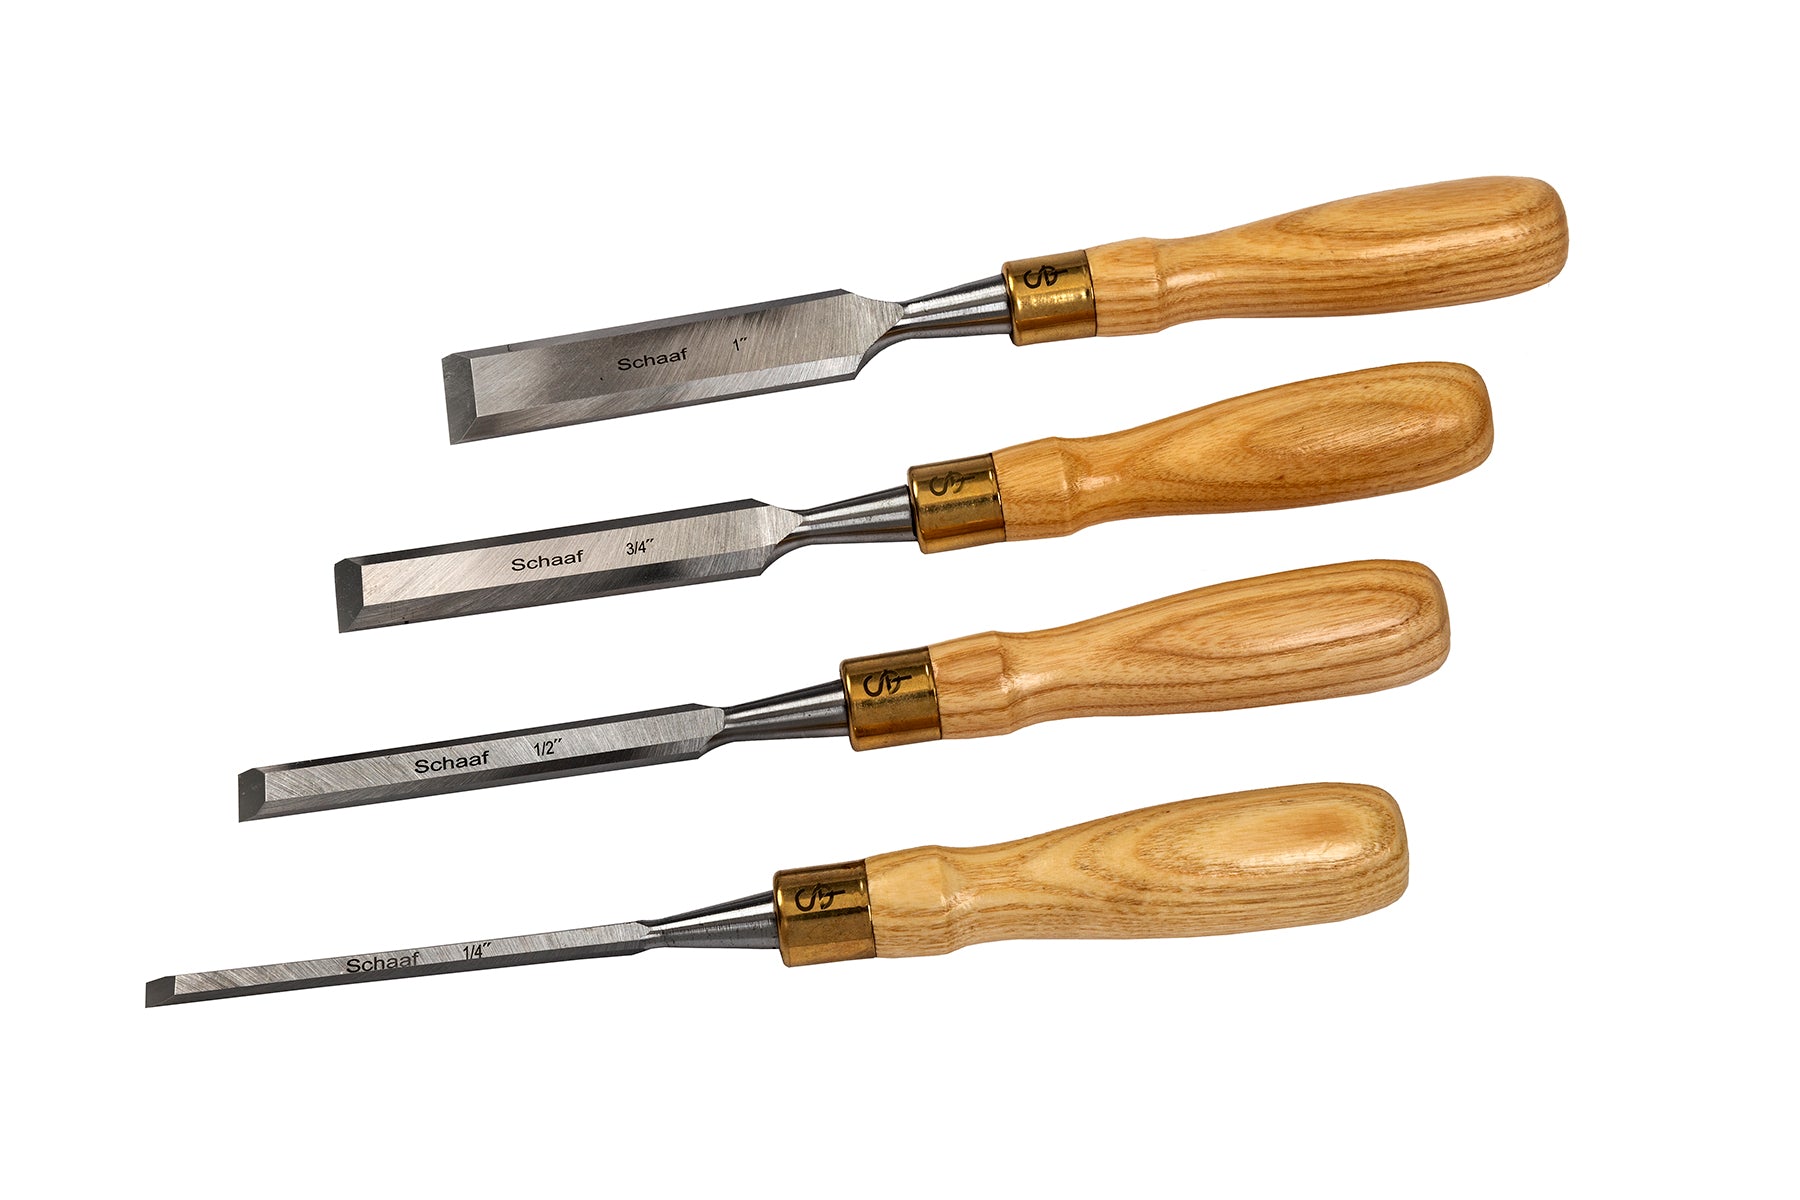 5.99 Wood Chisel Set Woodworking Bevel Edge Hand Carpentry 4PC - 1/4 1/2  3/4 1 tooltime